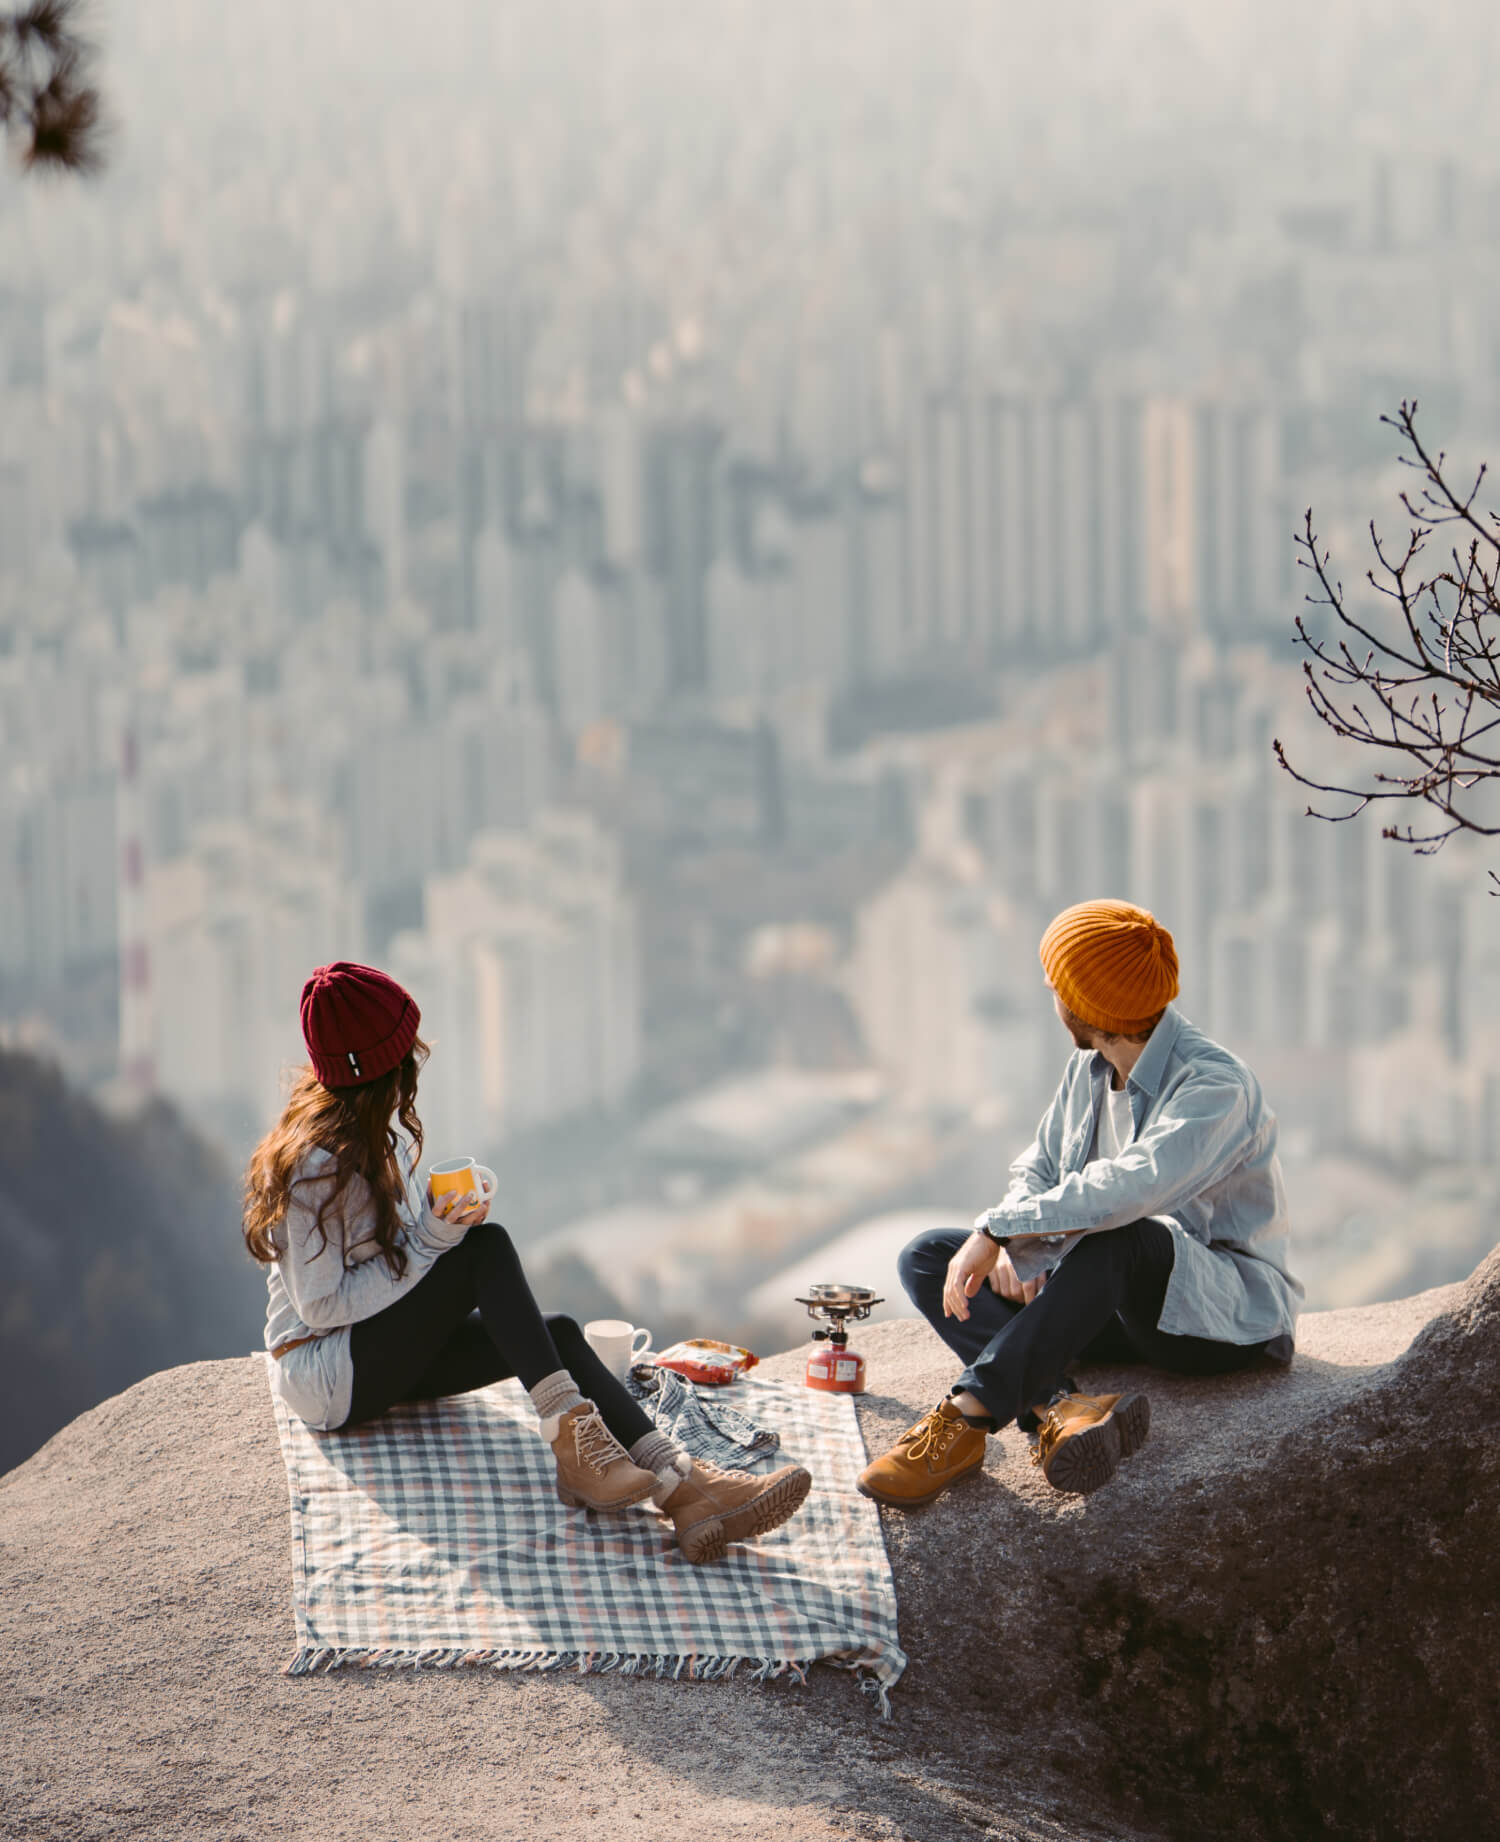 a man and woman sitting on a rock with a city in the background